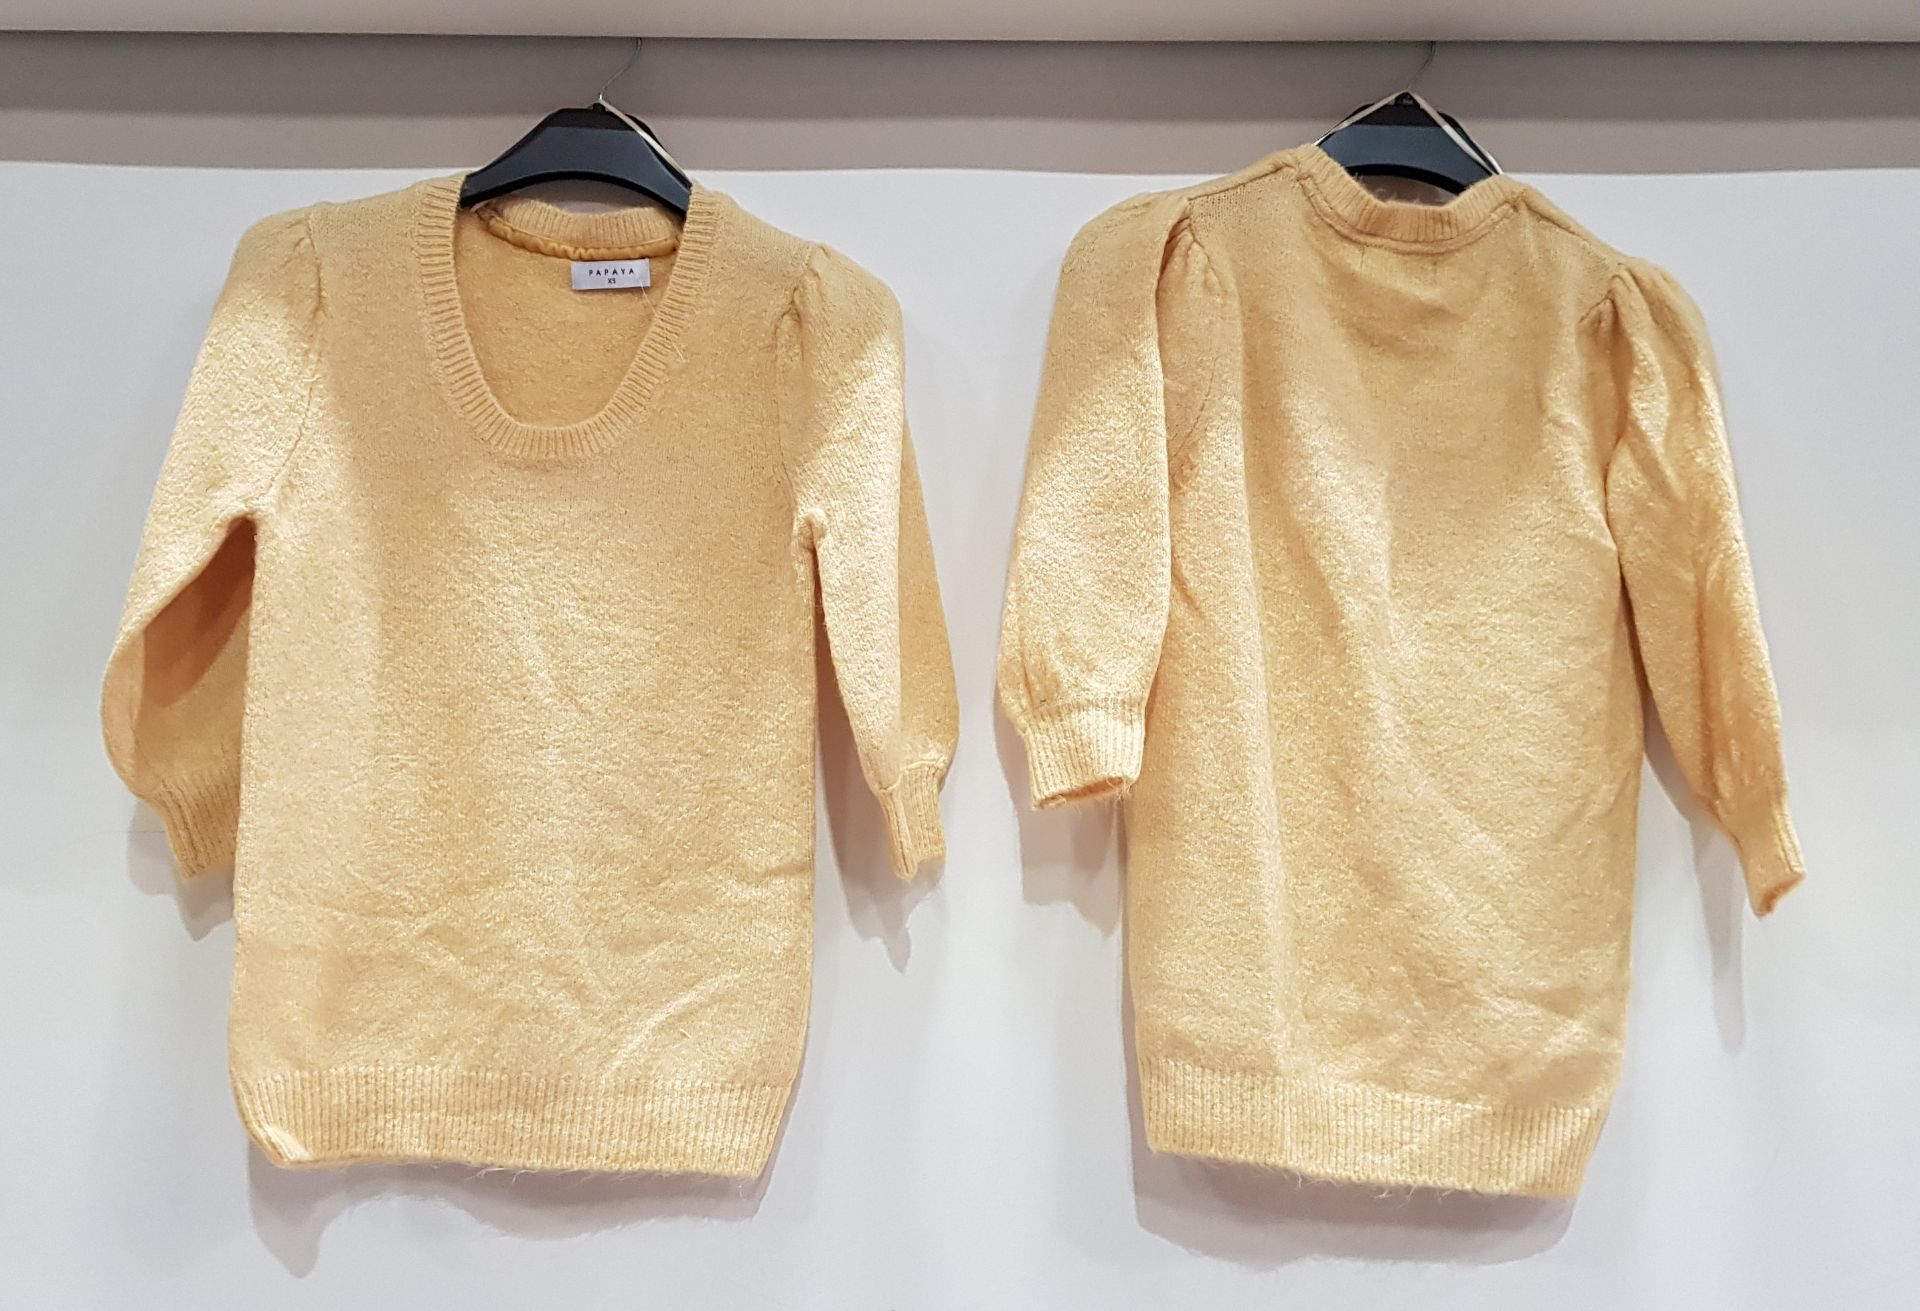 60 X BRAND NEW PAPAYA KNITTED CREW NECK SWEATERS - ALL IN YELLOW - IN VARIOUS SIZES - PICK LOOSE